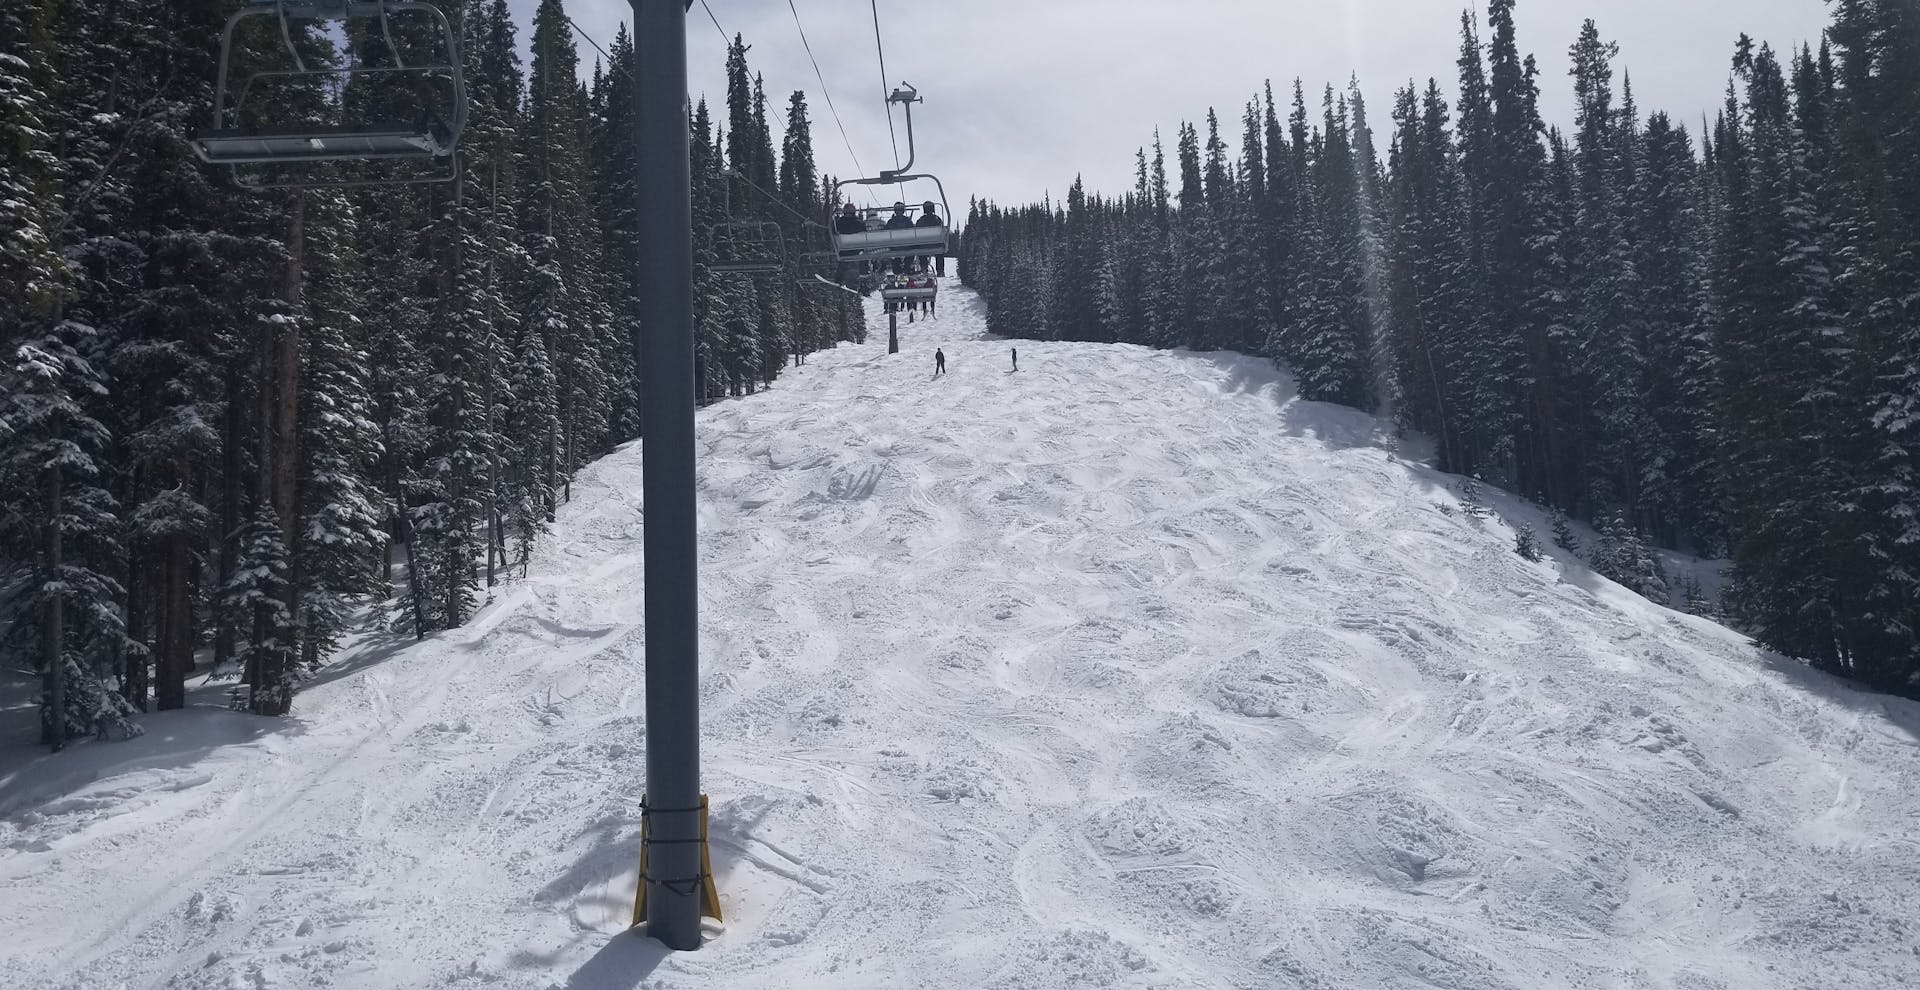 Copper mountain and chairlift